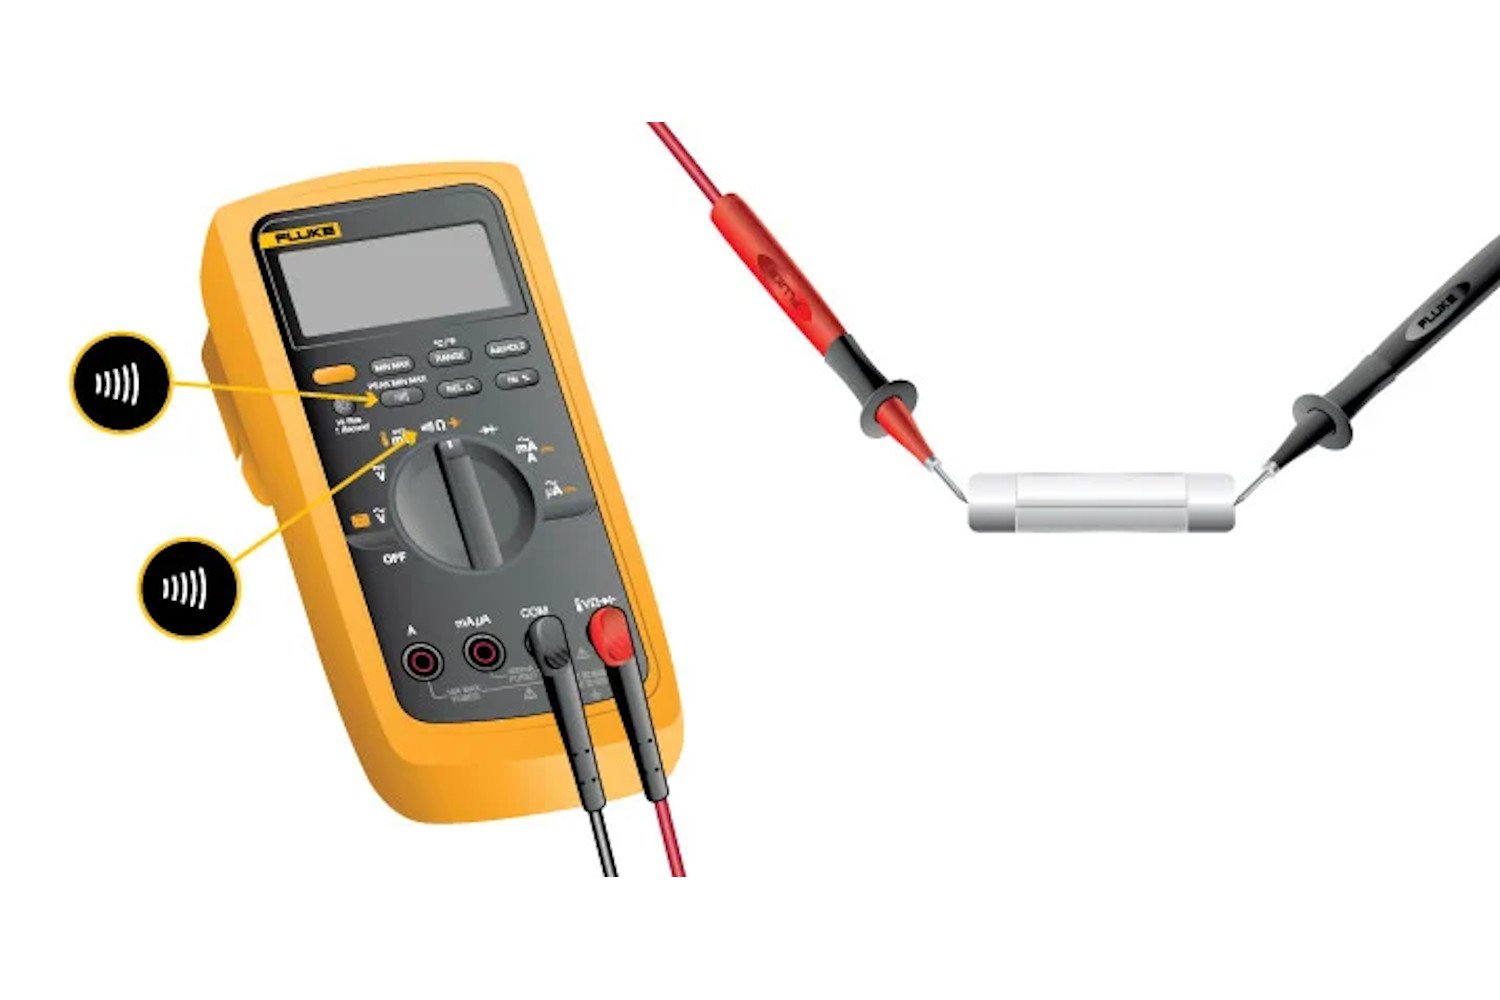 Using a digital multimeter as a continuity tester